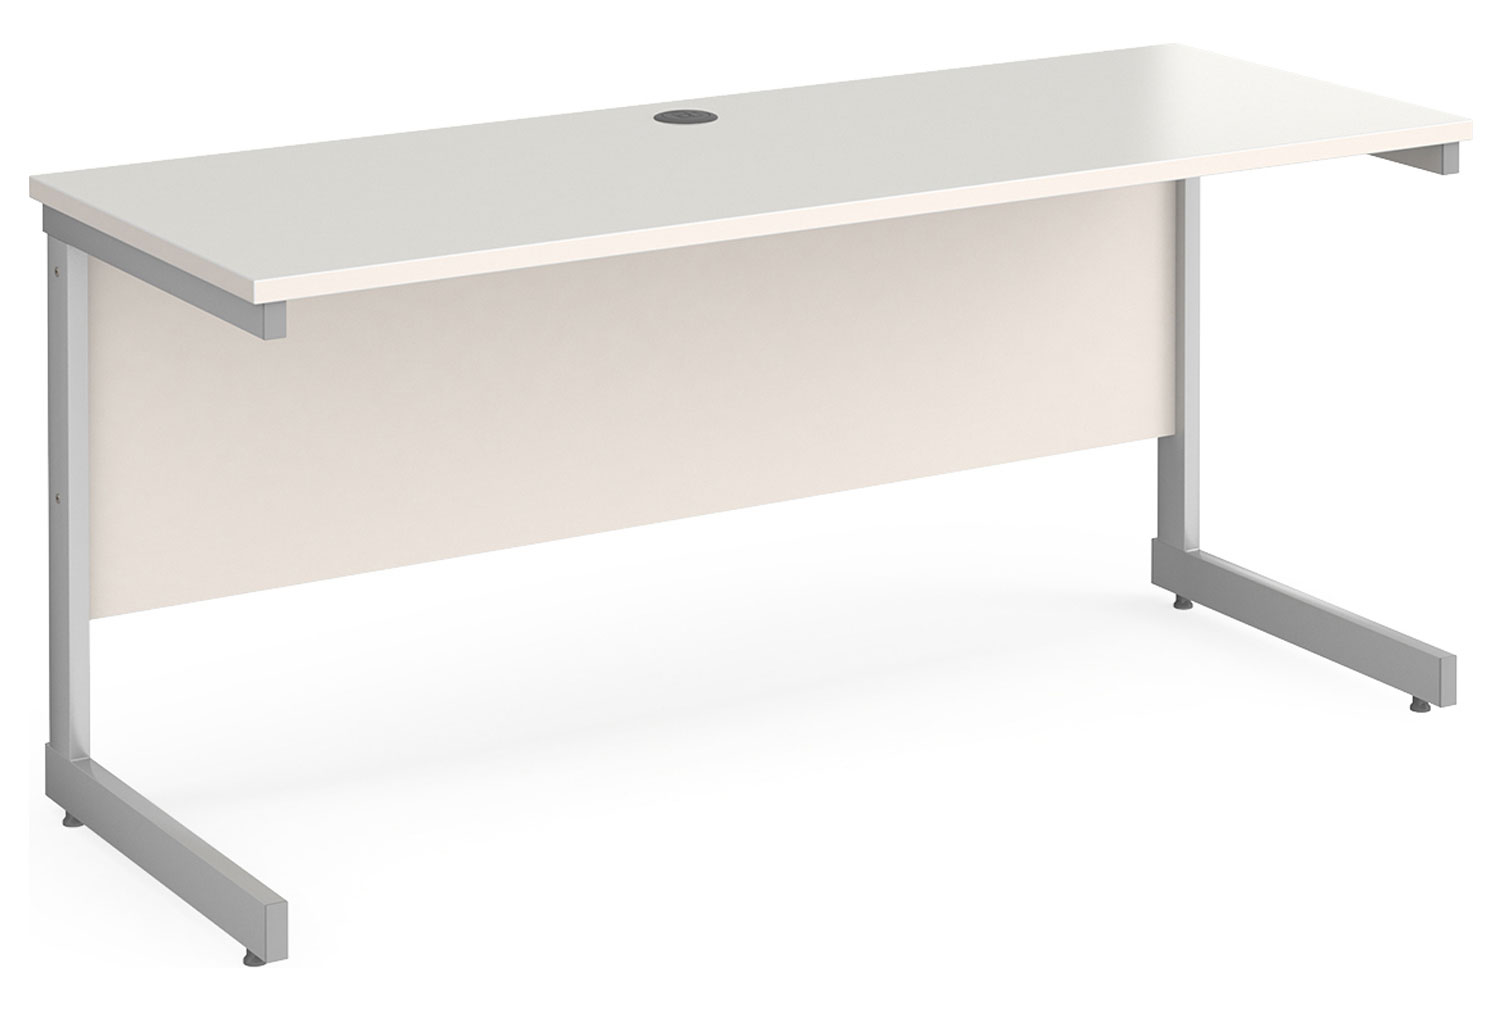 Thrifty Next-Day Narrow Rectangular Office Desk White, 160w60dx73h (cm), Express Delivery